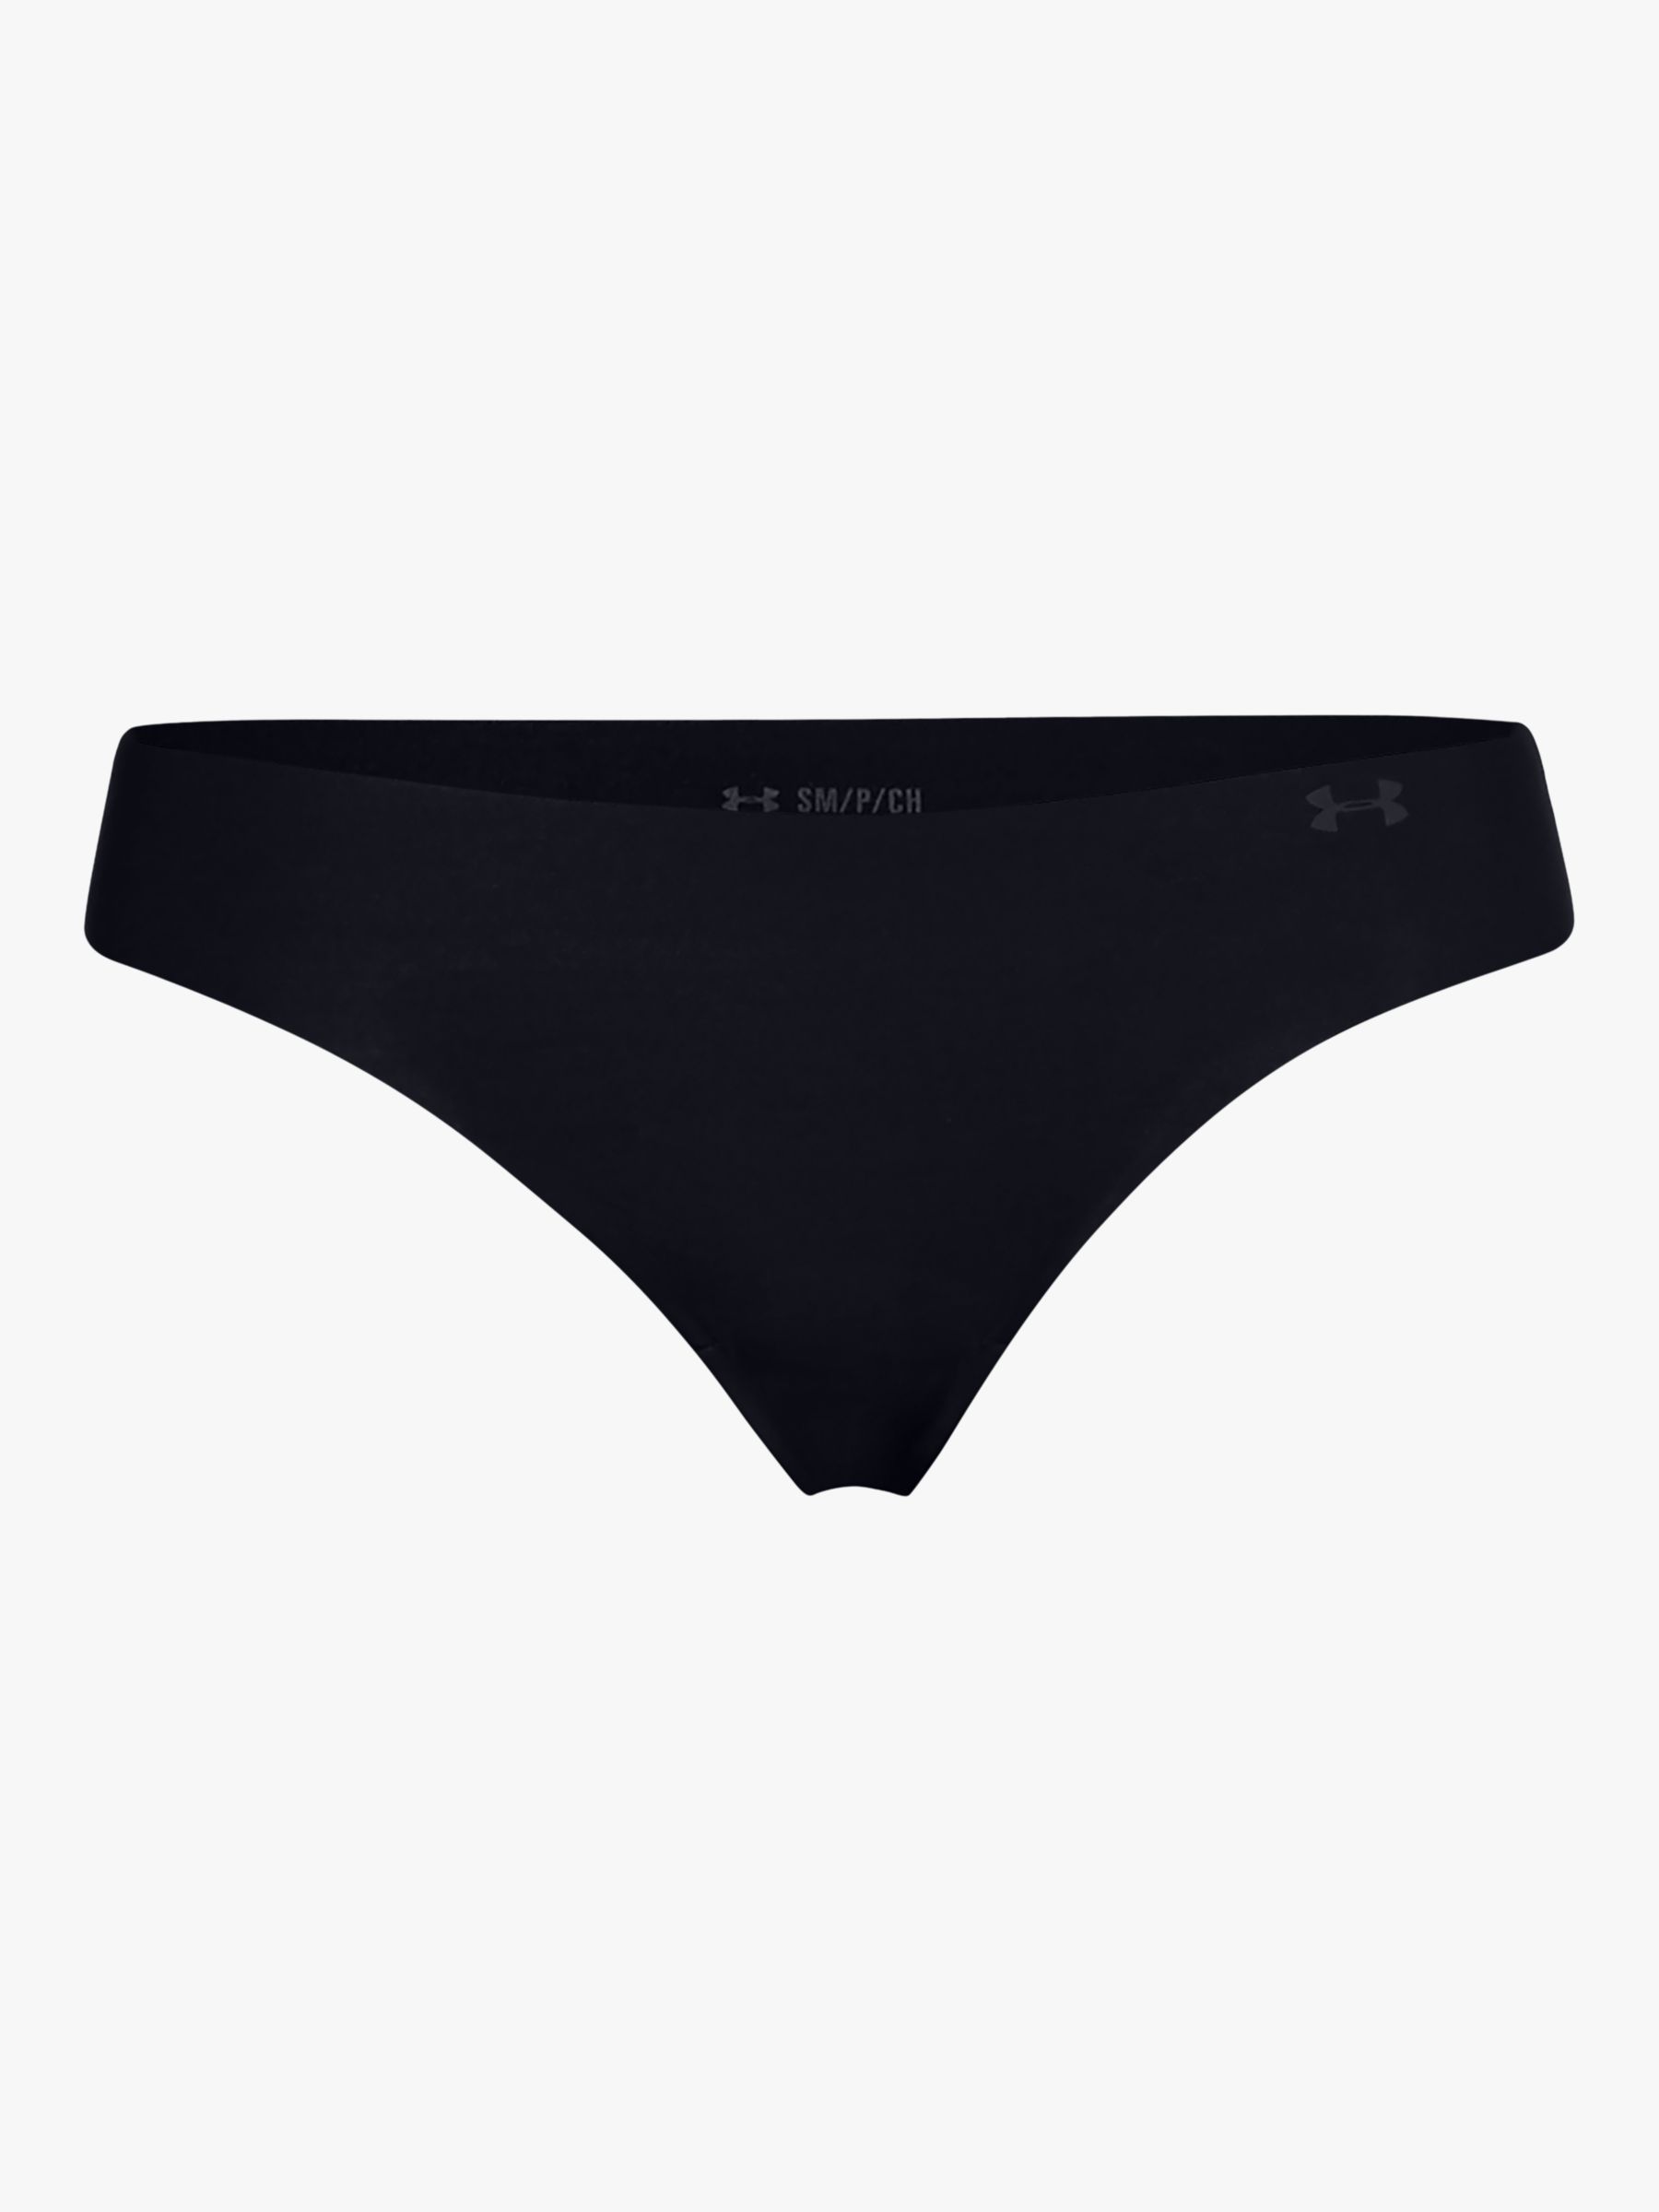 New Women's 3 Pk. Under Armour Pure Stretch Moisture Wicking Thong Panties.  XL